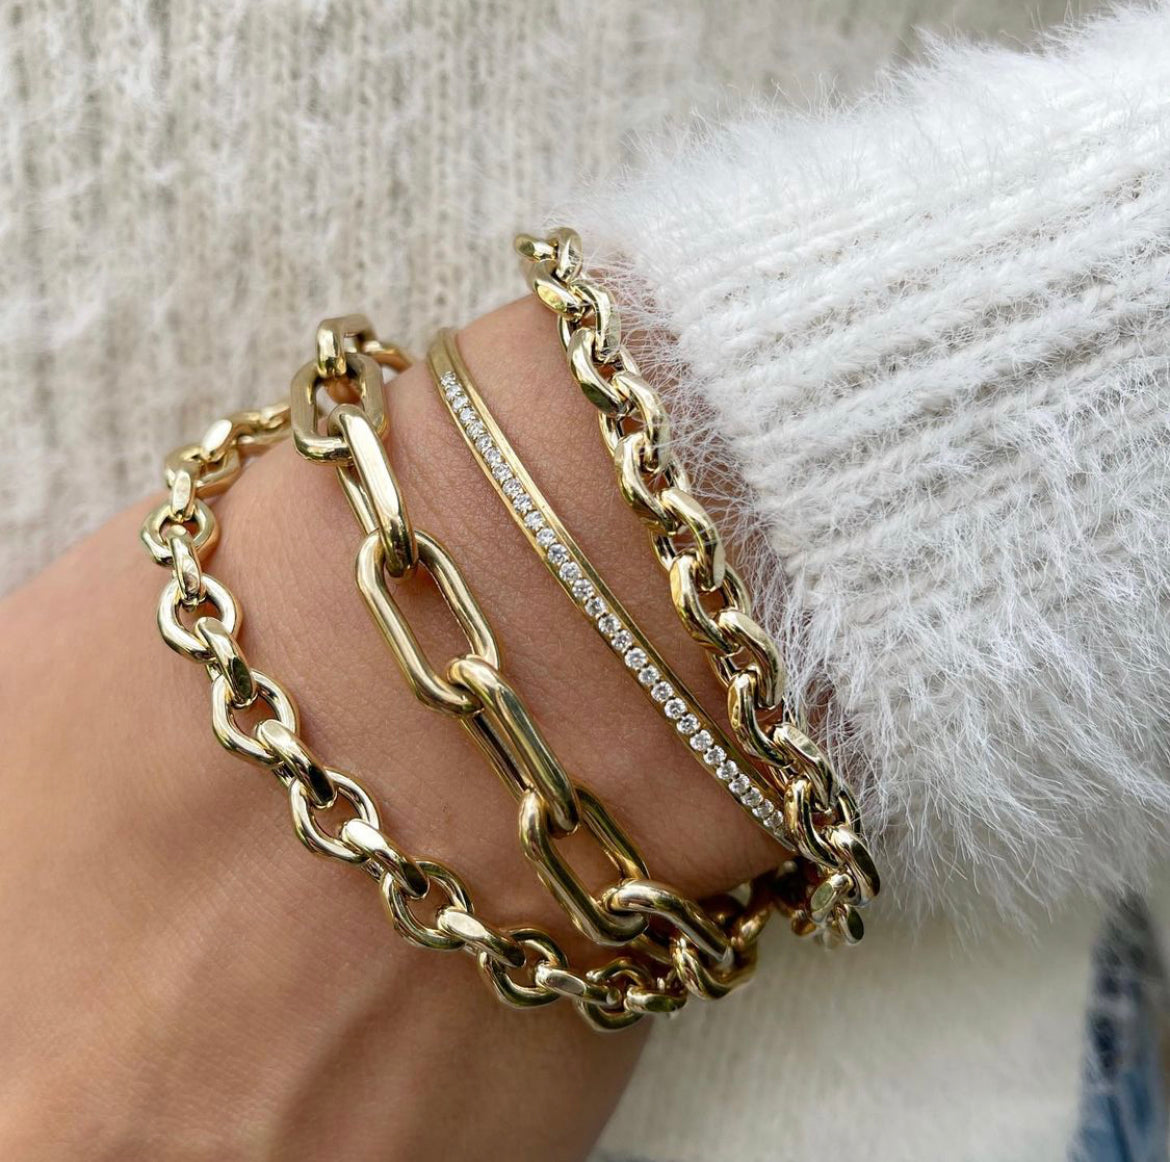 extra-large-open-link-bracelet-yellow-gold-shylee-rose-jewelry